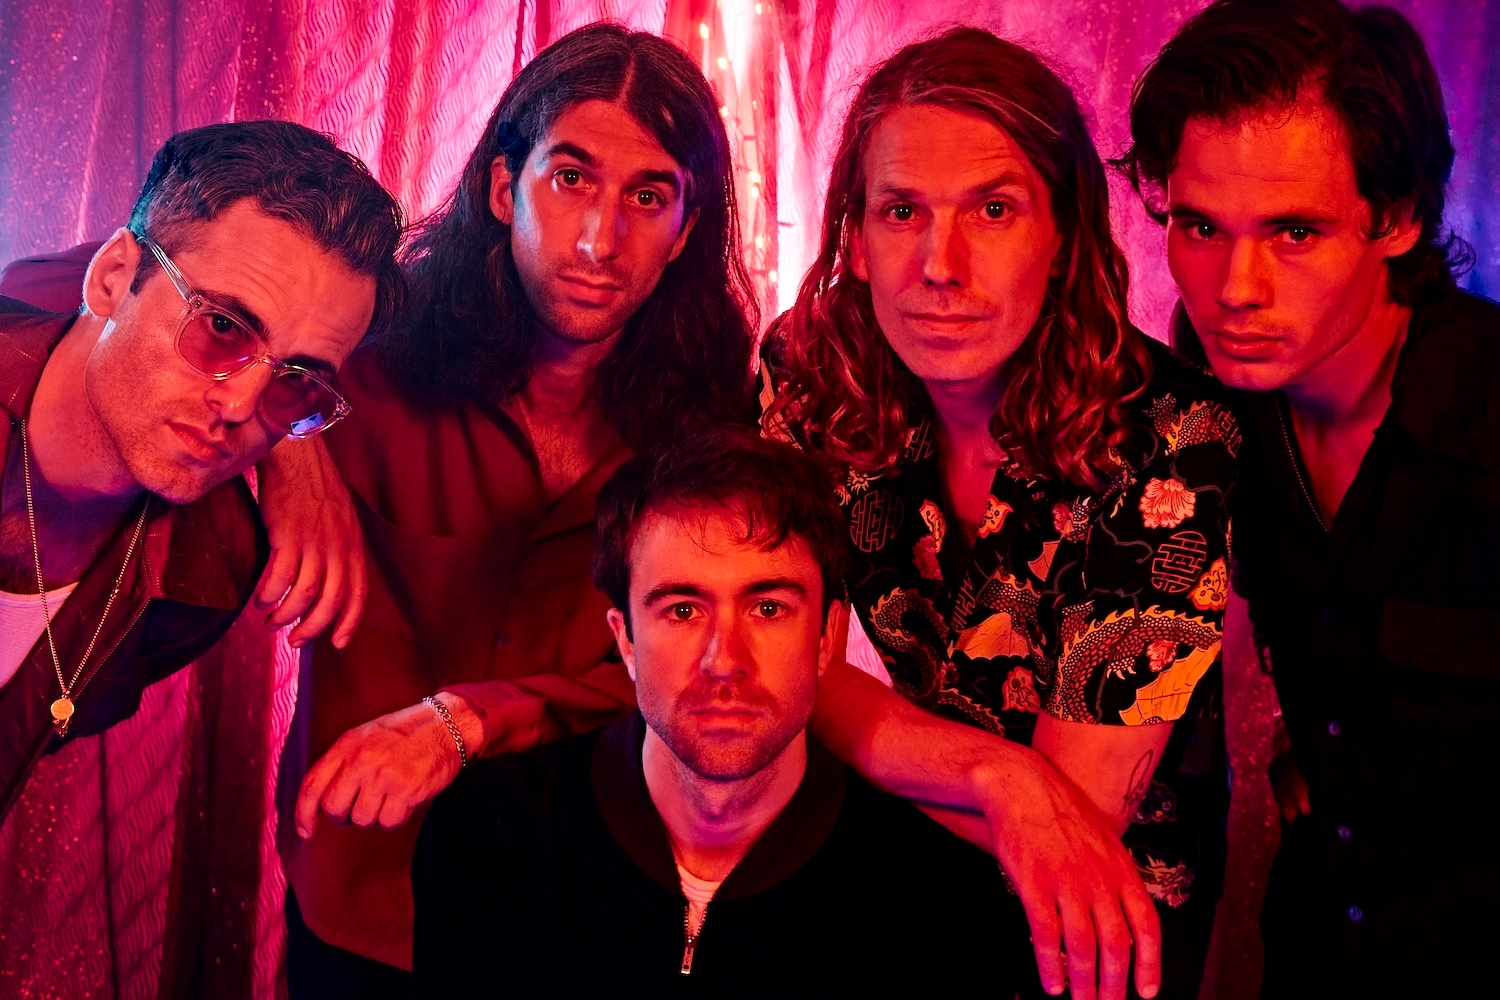 Watch The Vaccines perform ‘Paranormal Romance’ live at Abbey Road